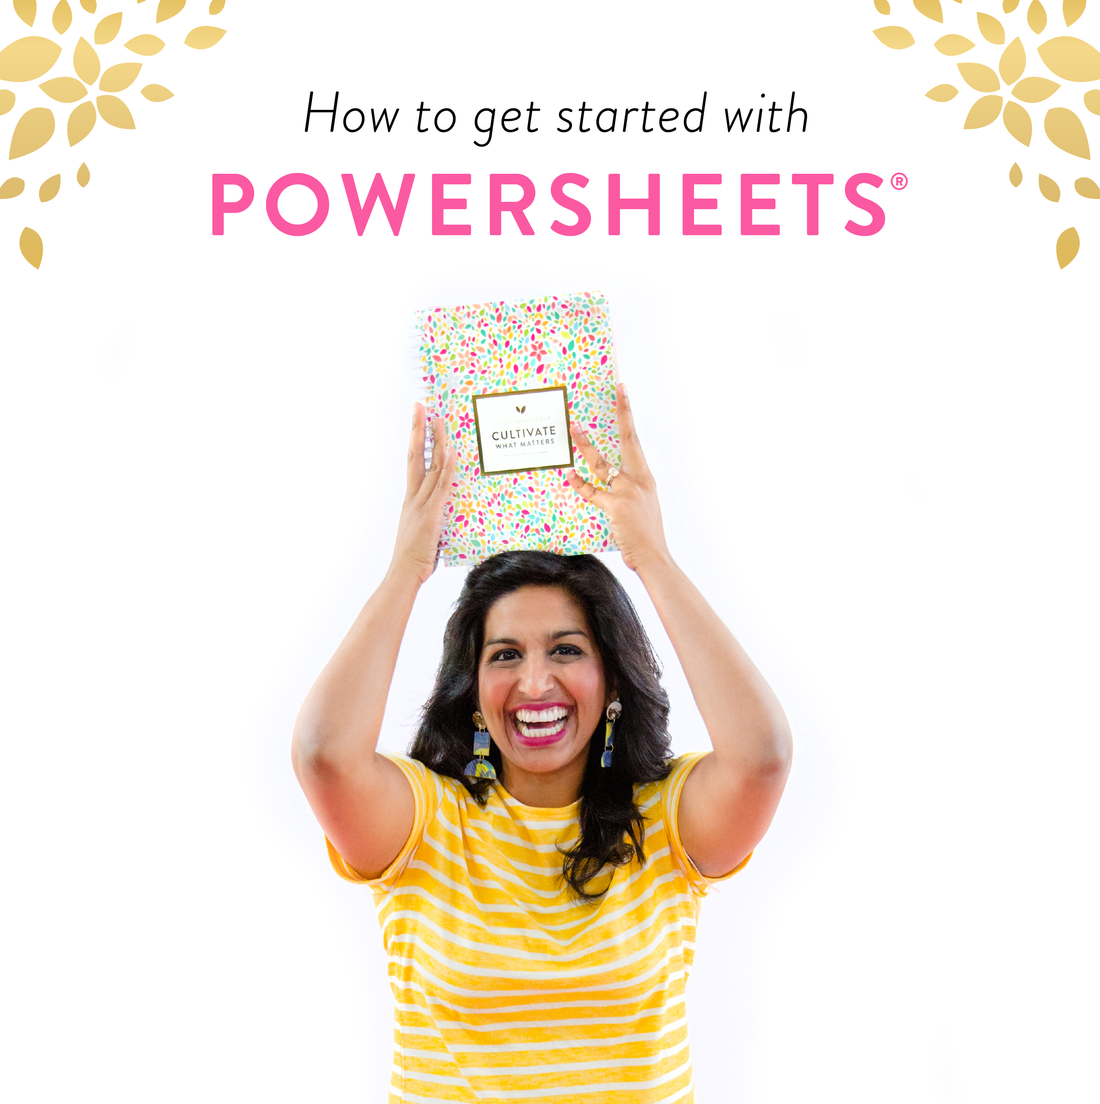 I bought my PowerSheets. Now what?